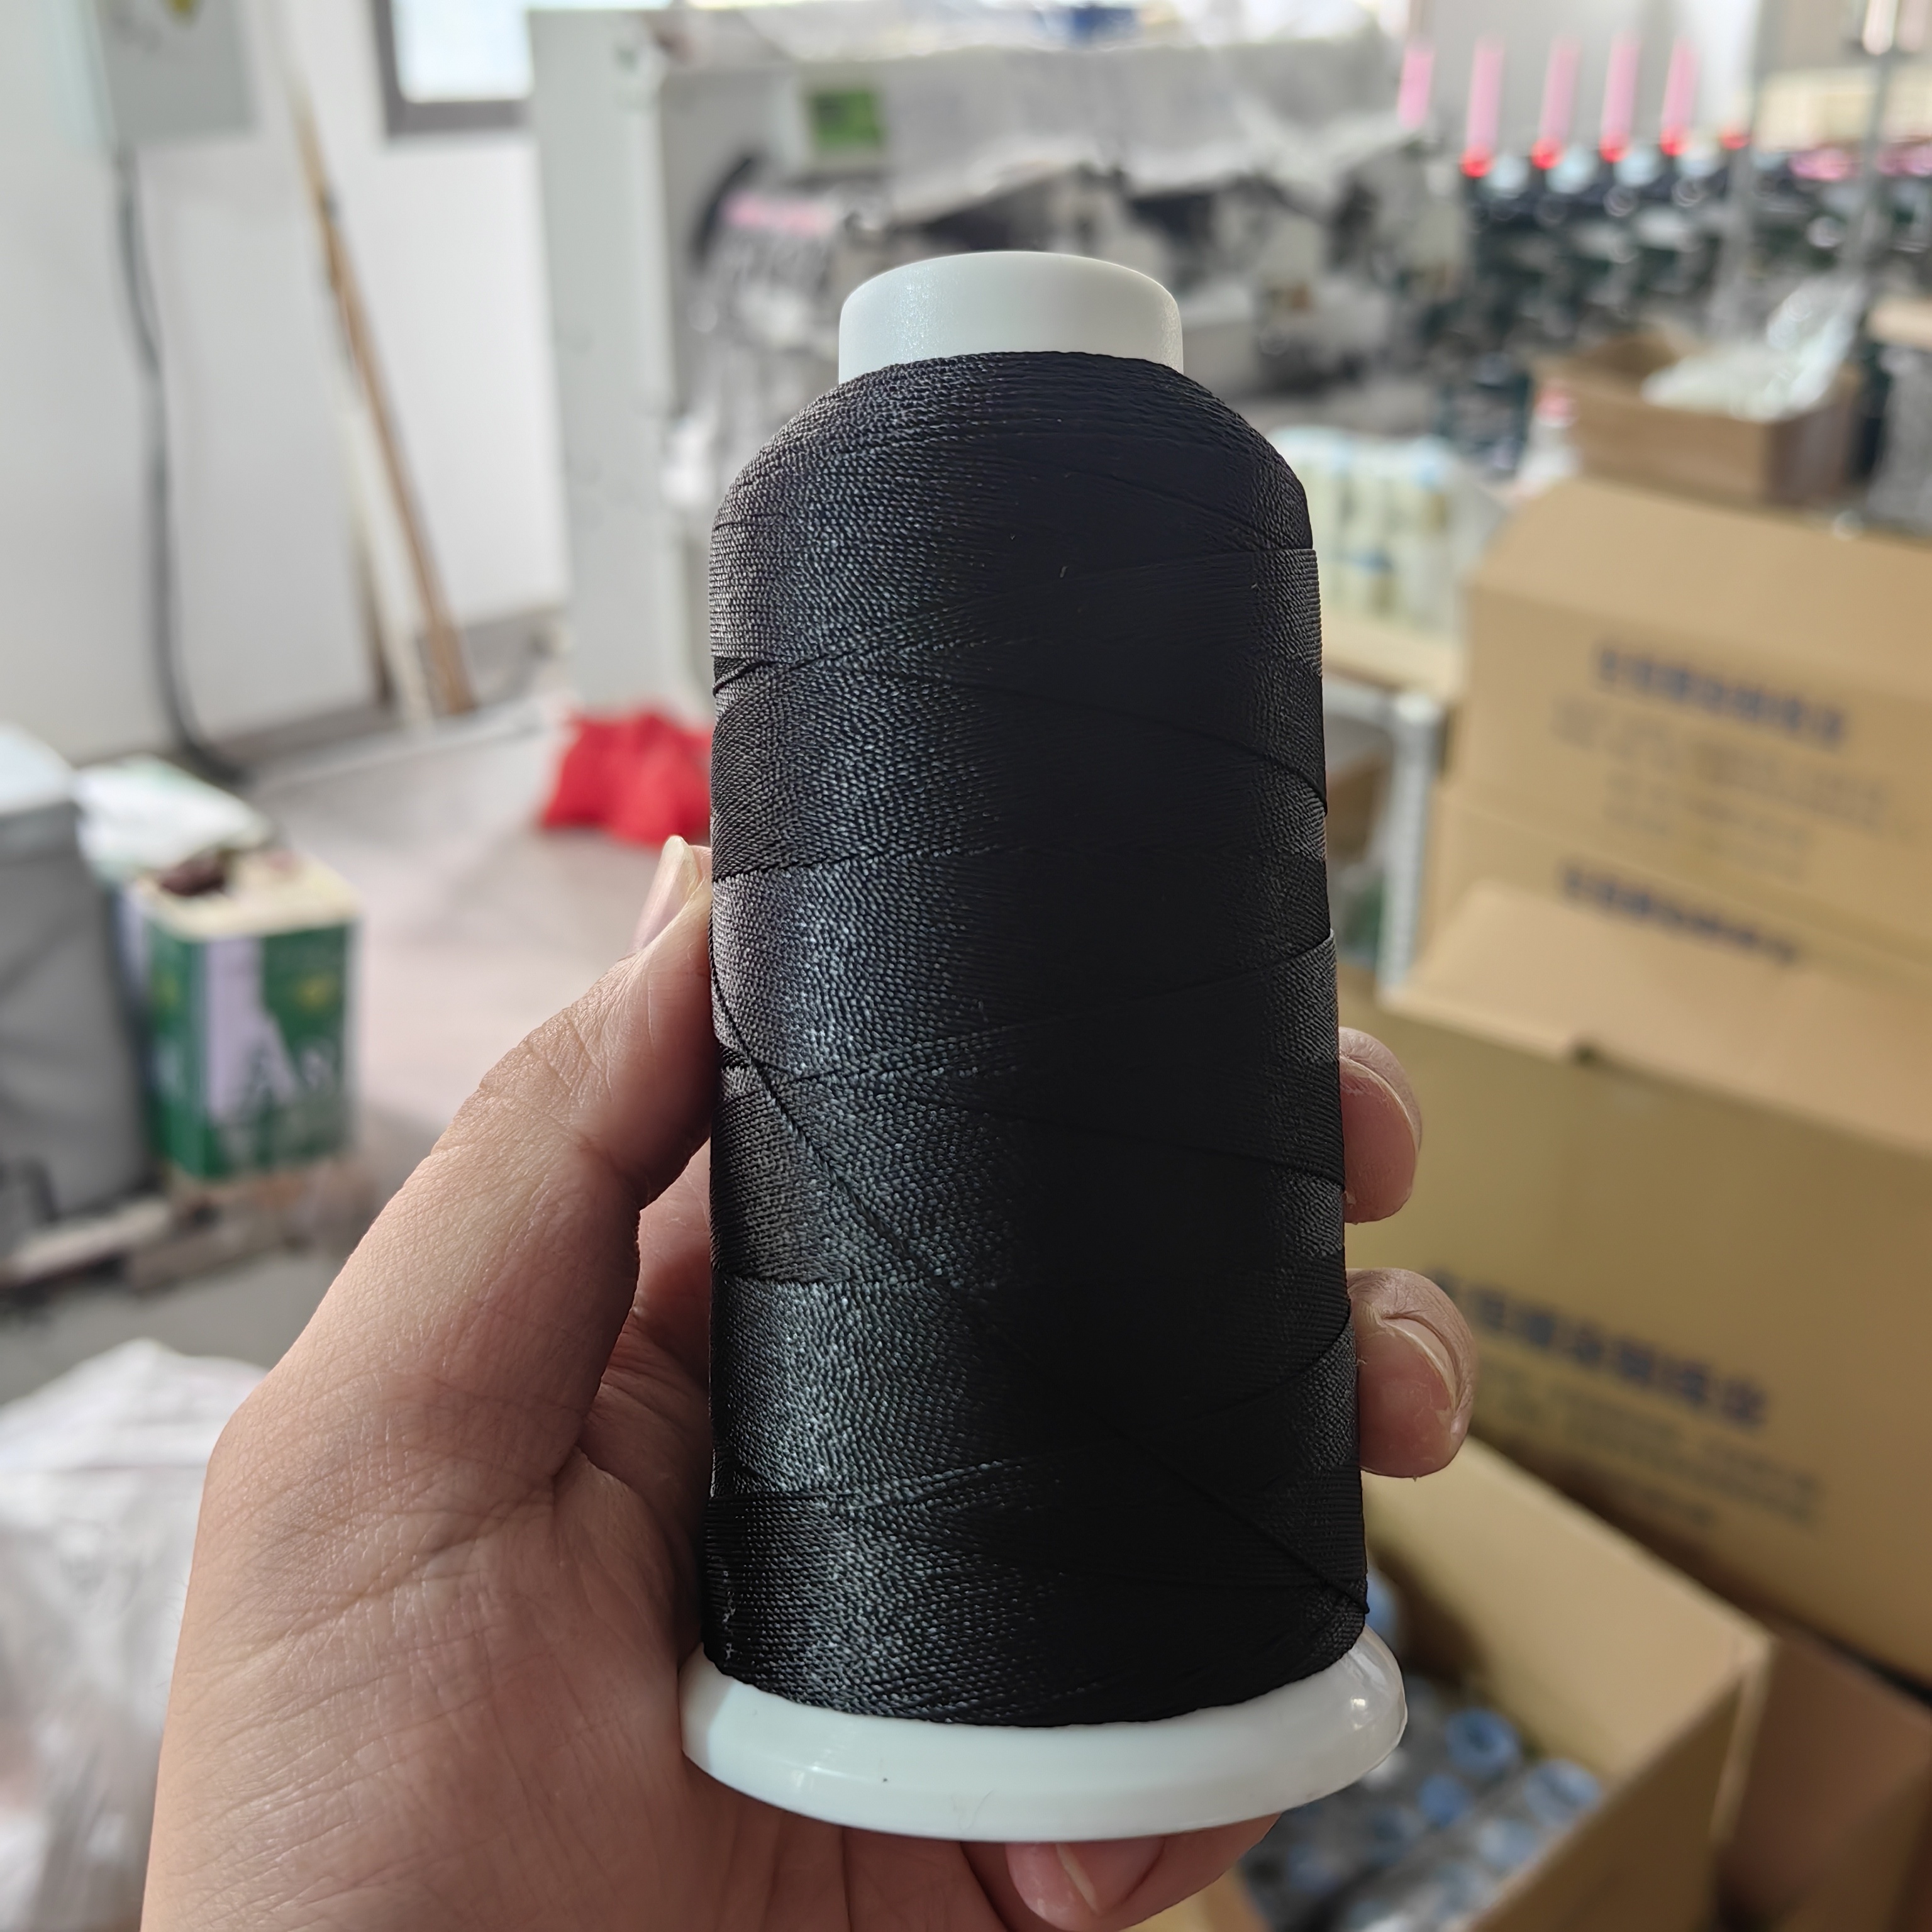 1roll Sewing Thread 700 Yards Size 420d/3 For Leather Denim Hand Machine  Craft Shoe Bag Repairing Extra Strong Heavy Duty High Temperature Resistant, Free Shipping For New Users